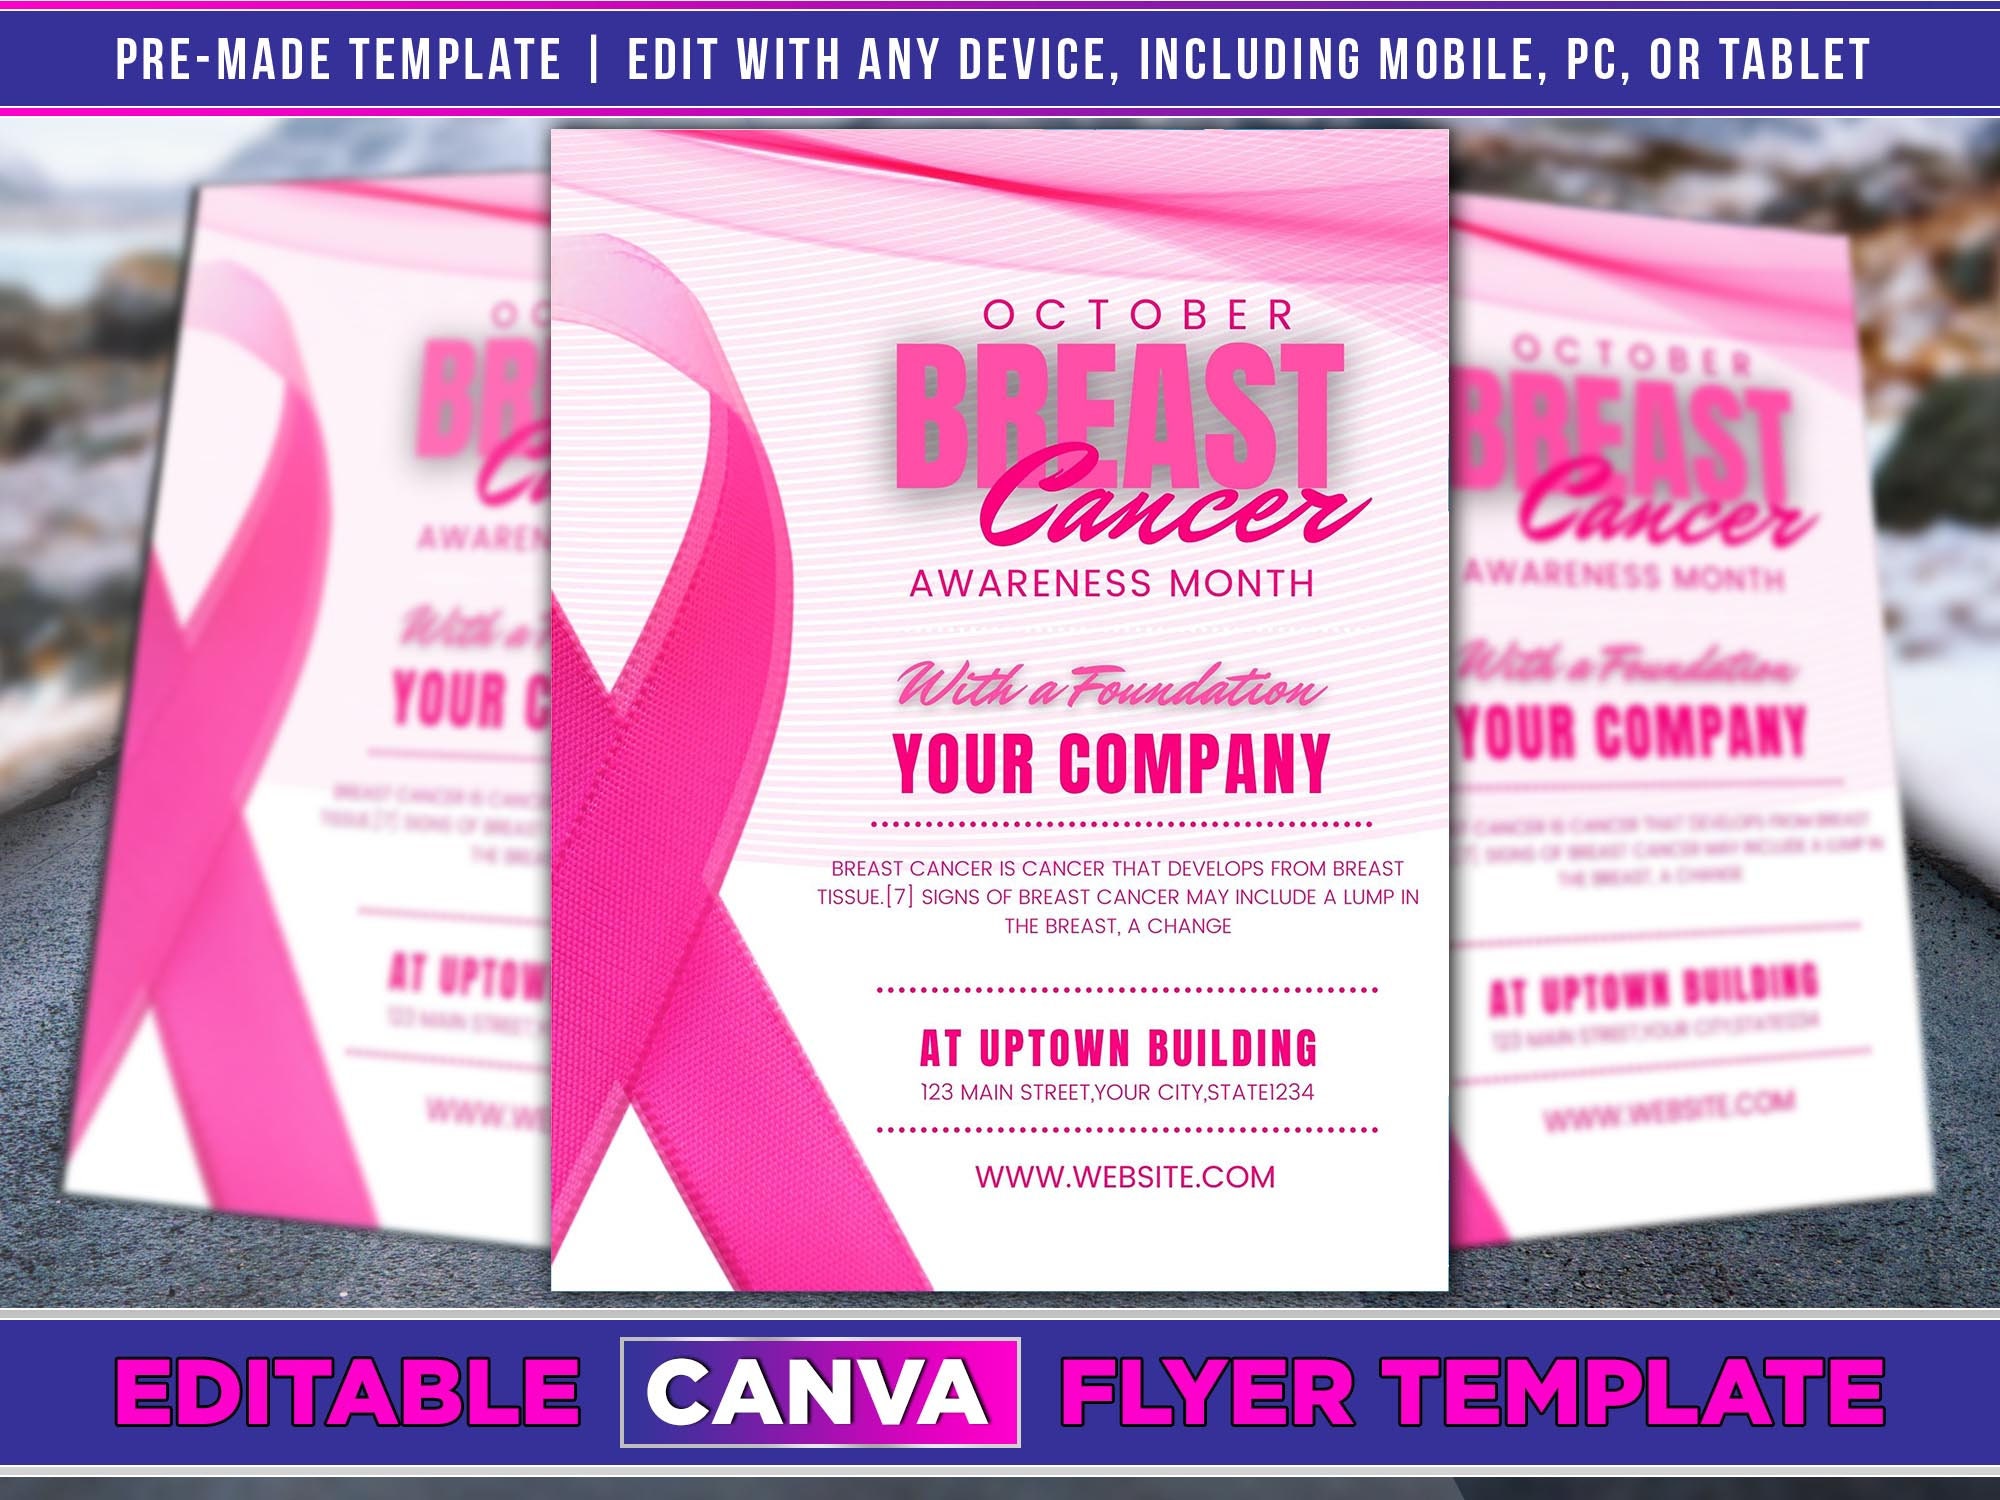 Breast cancer awareness month Template